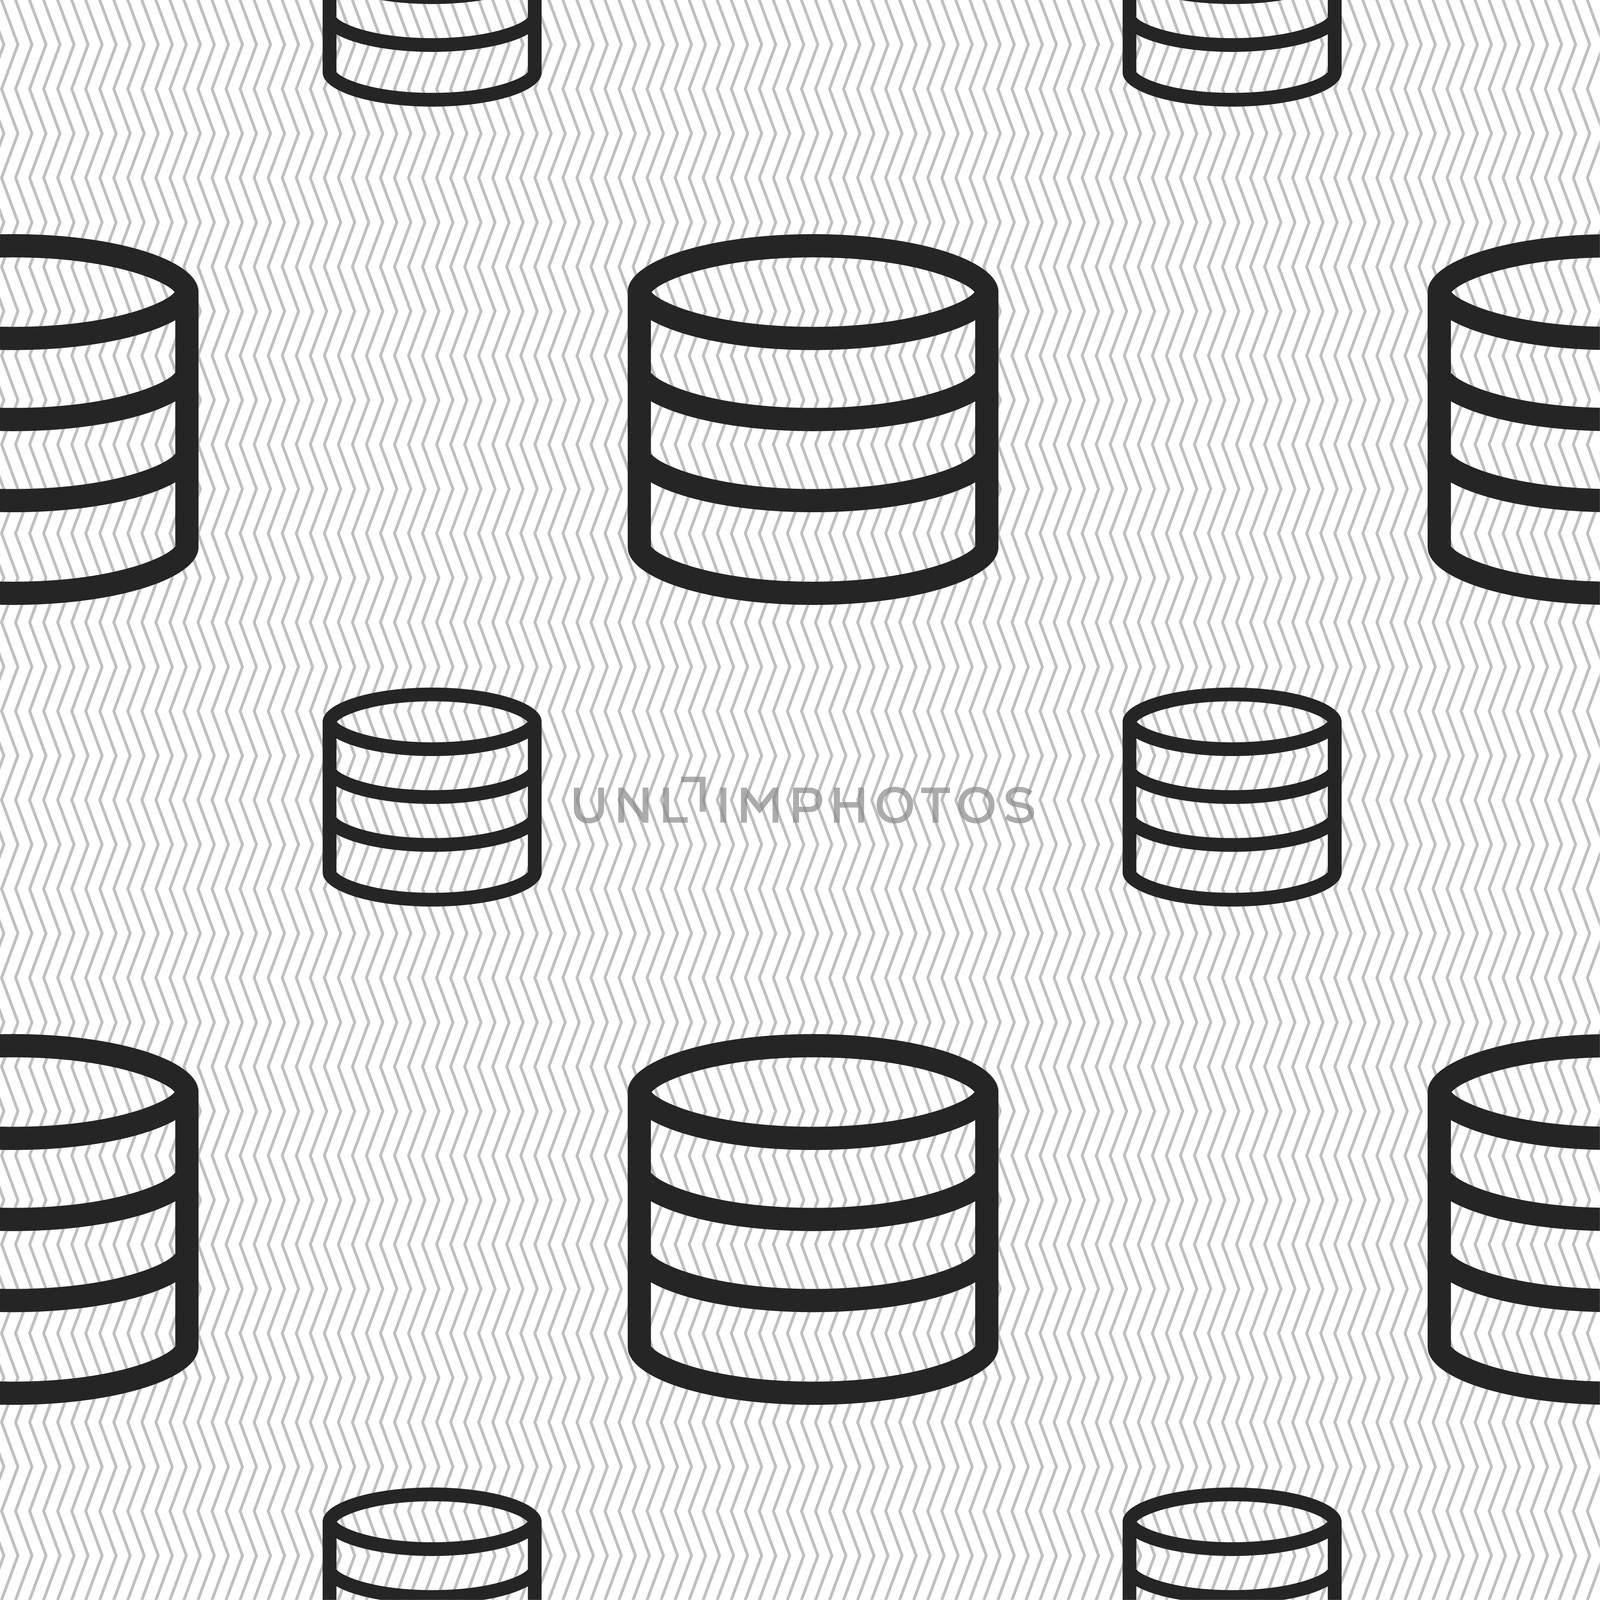 Hard disk and database icon sign. Seamless pattern with geometric texture. illustration